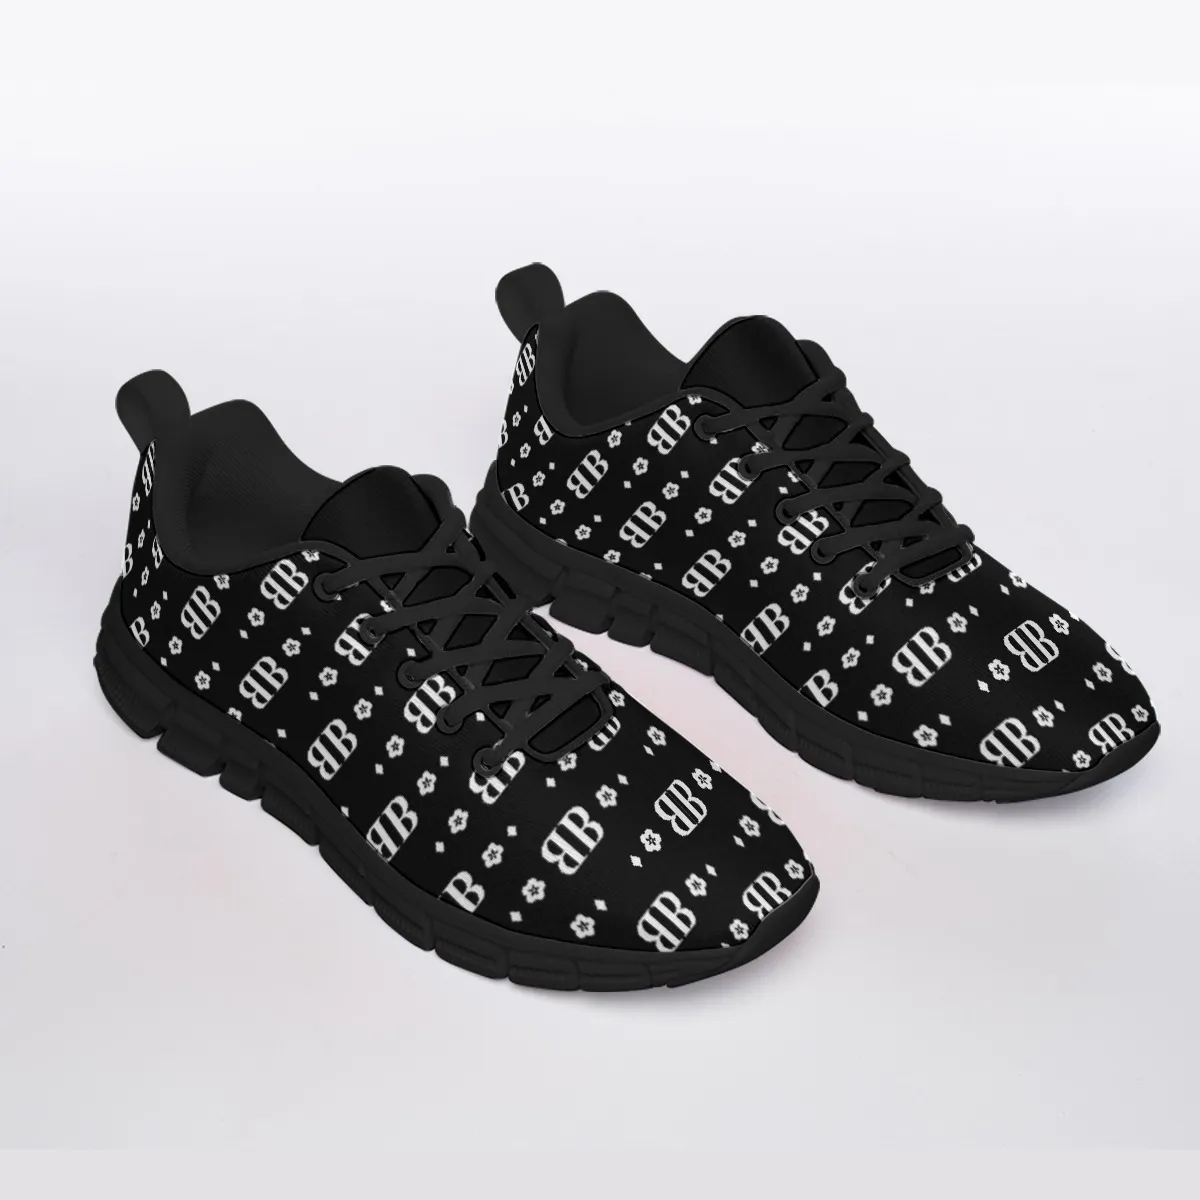 Mens Sport Shoes With Black Sole 2